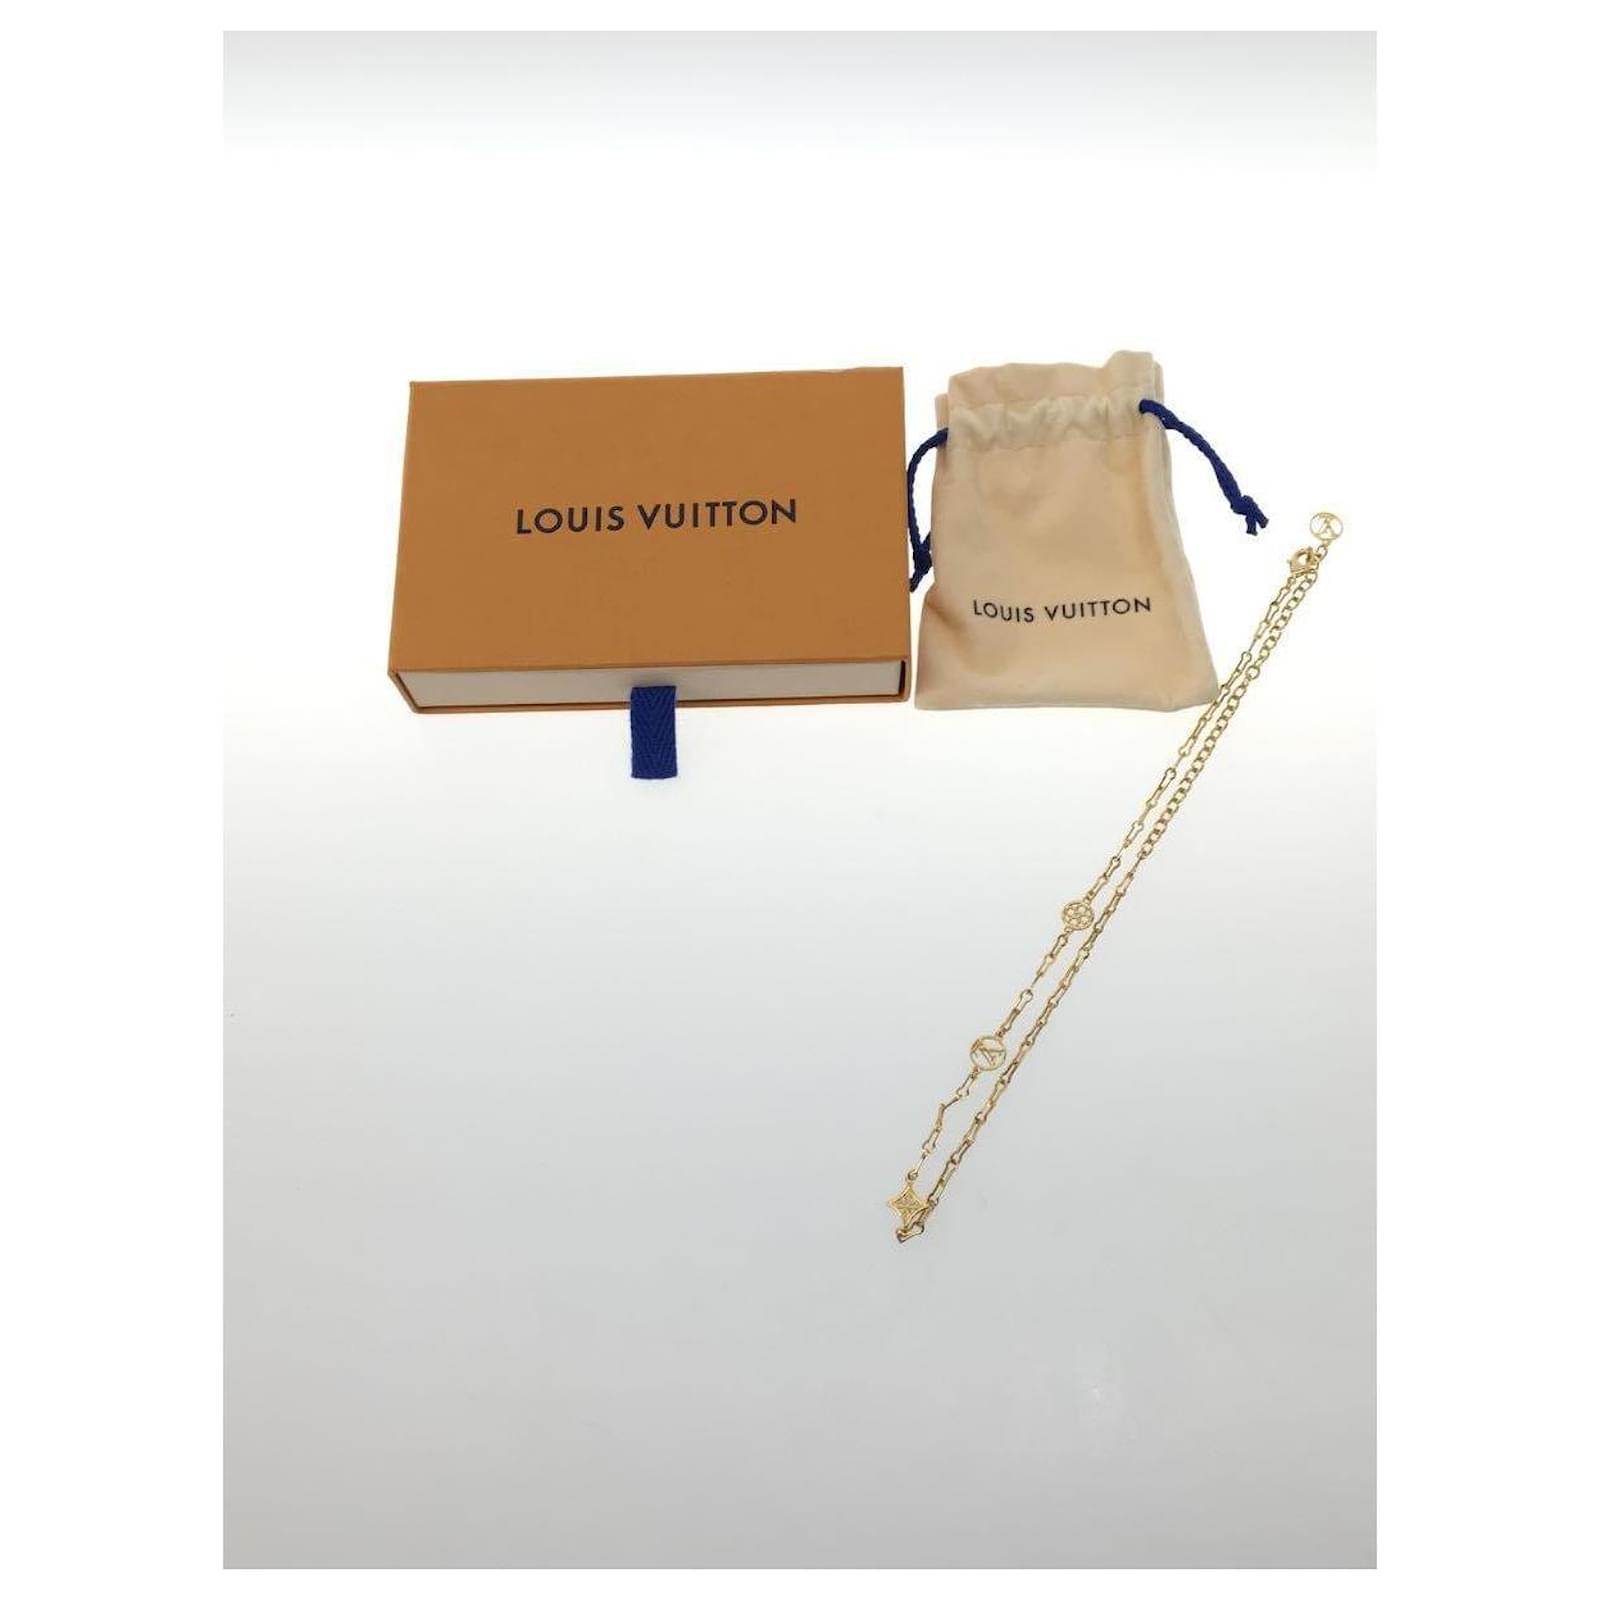 louis vuitton m69622 / Collier Forever Young / Necklace / GLD / LV